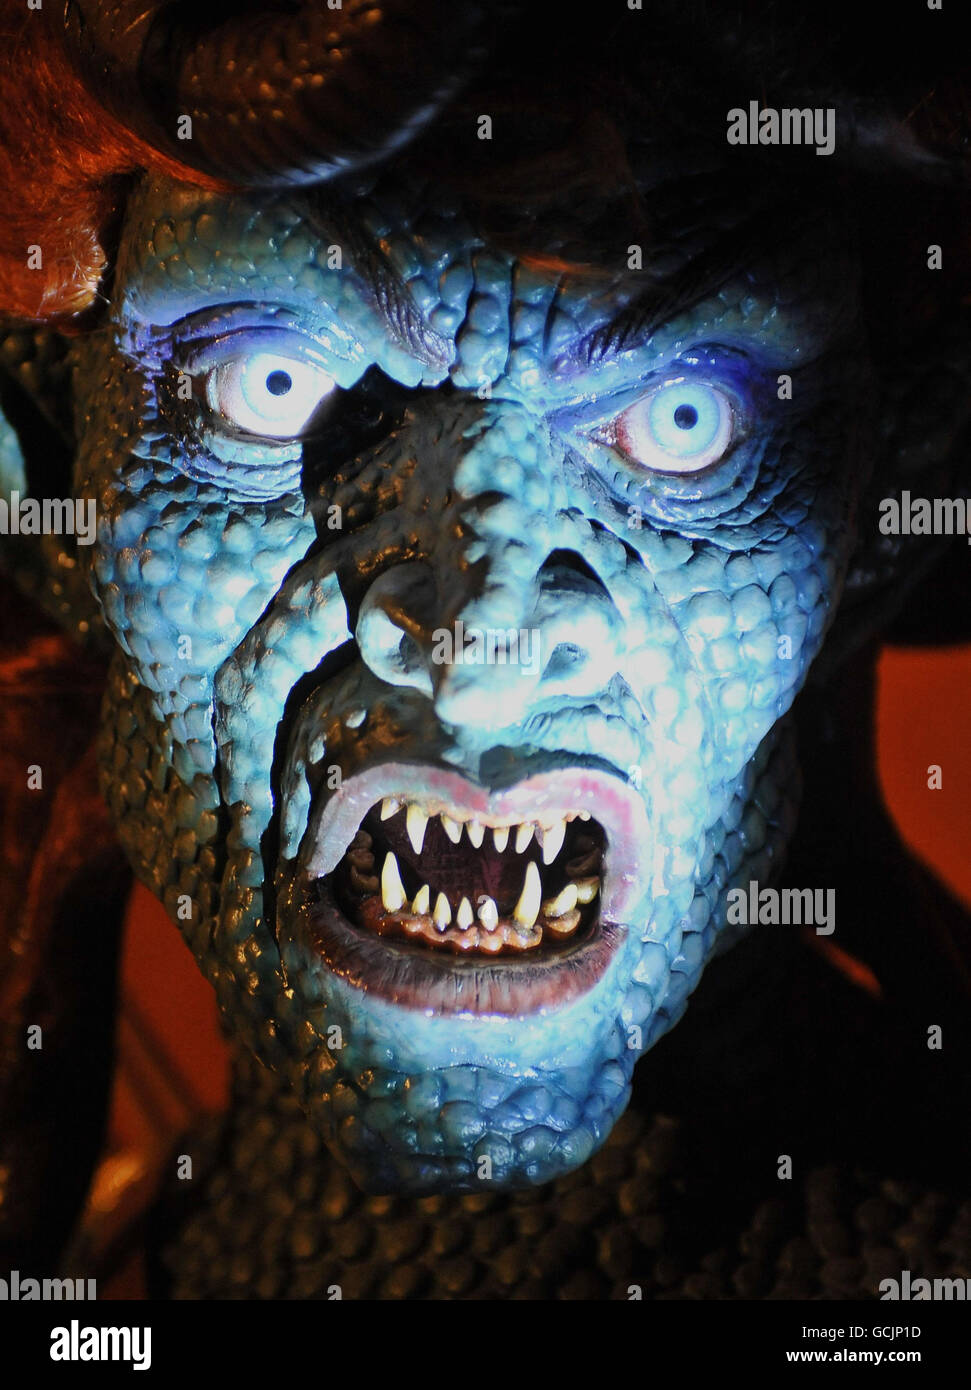 A model of the Medusa figure from the 1981 film Clash Of The Titans stands at the entrance to the London Film Museum's Ray Harryhausen - Myths And Legends exhibition. Stock Photo